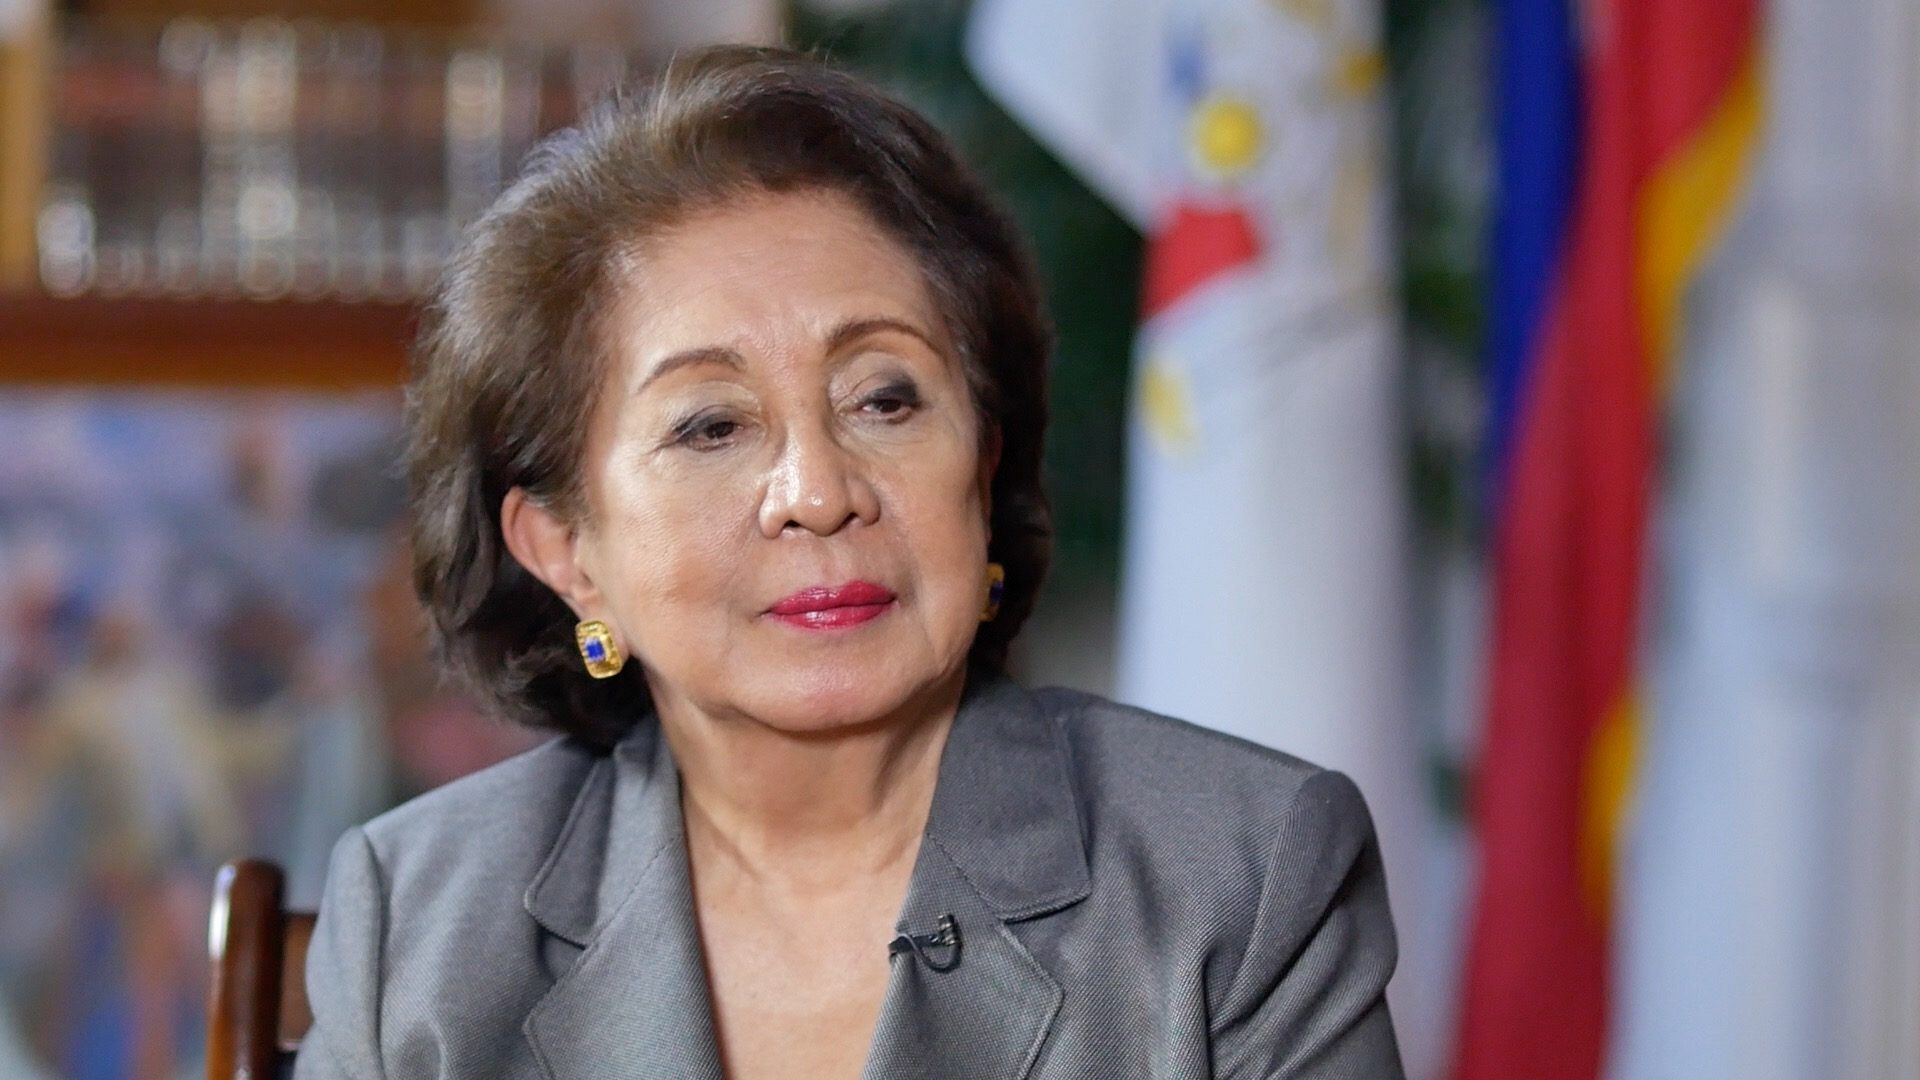 Supreme Court will clarify guidelines on delay doctrine – Morales